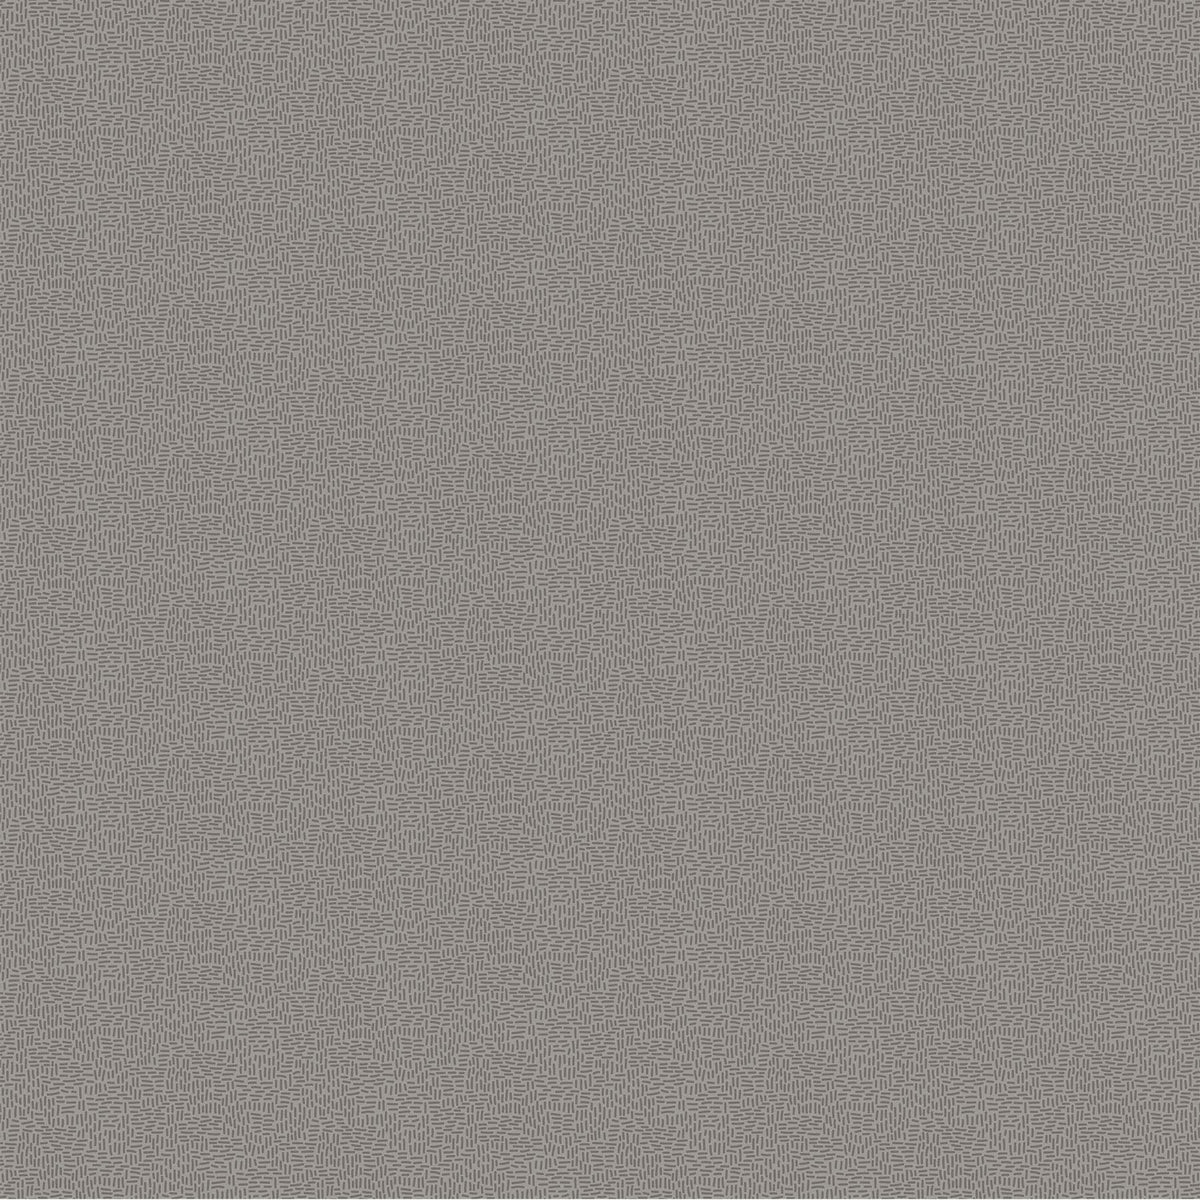 Neutrality Quilt Fabric - Thatched in Cool Gray - 10296-92